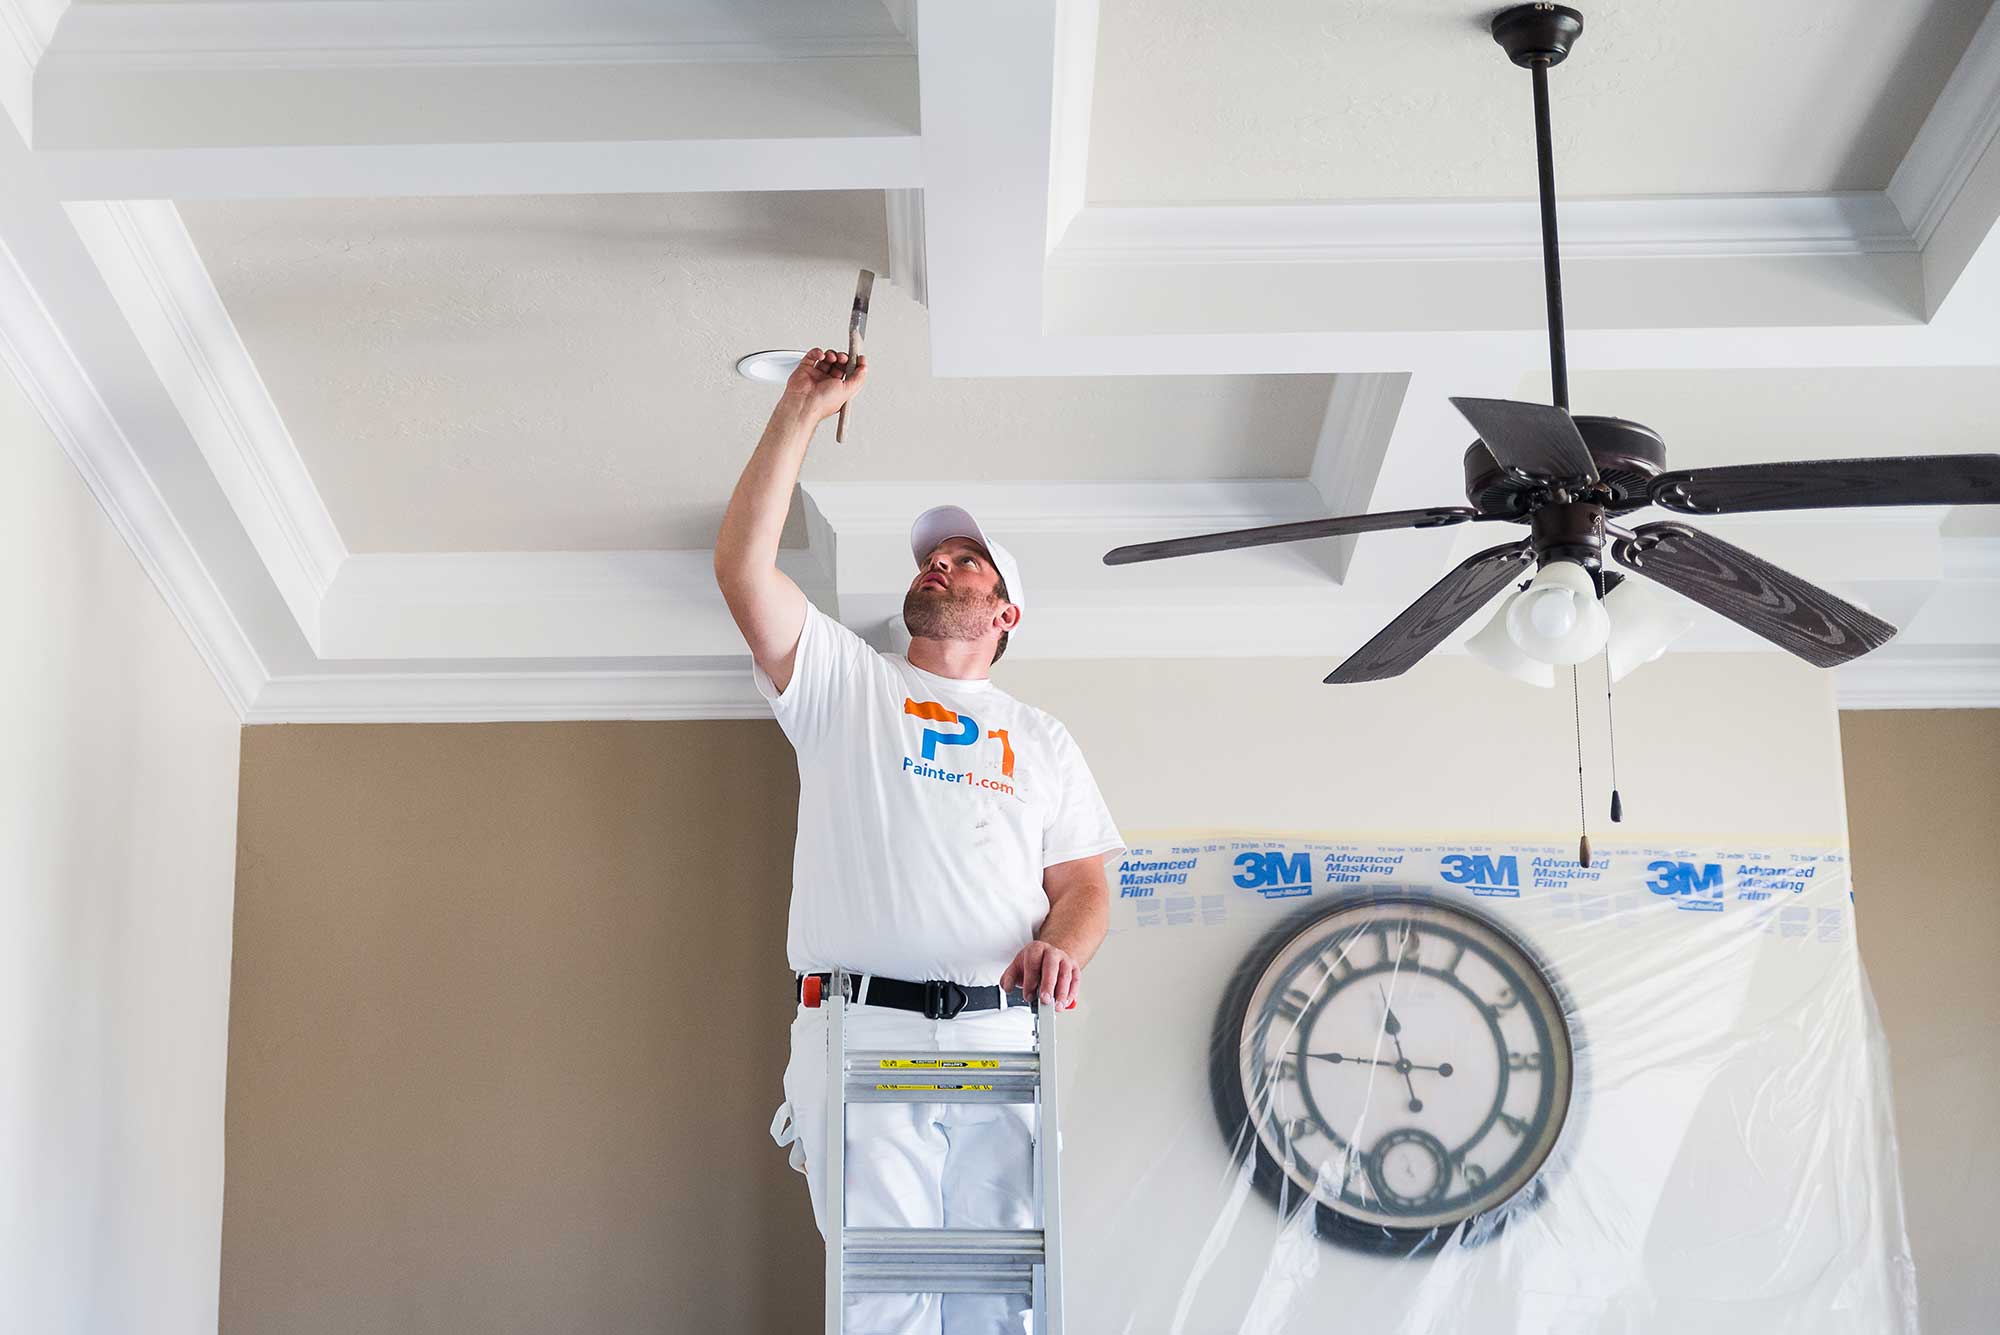 Painter1 of Salt Lake City offers professional popcorn ceiling removal in Salt Lake City.